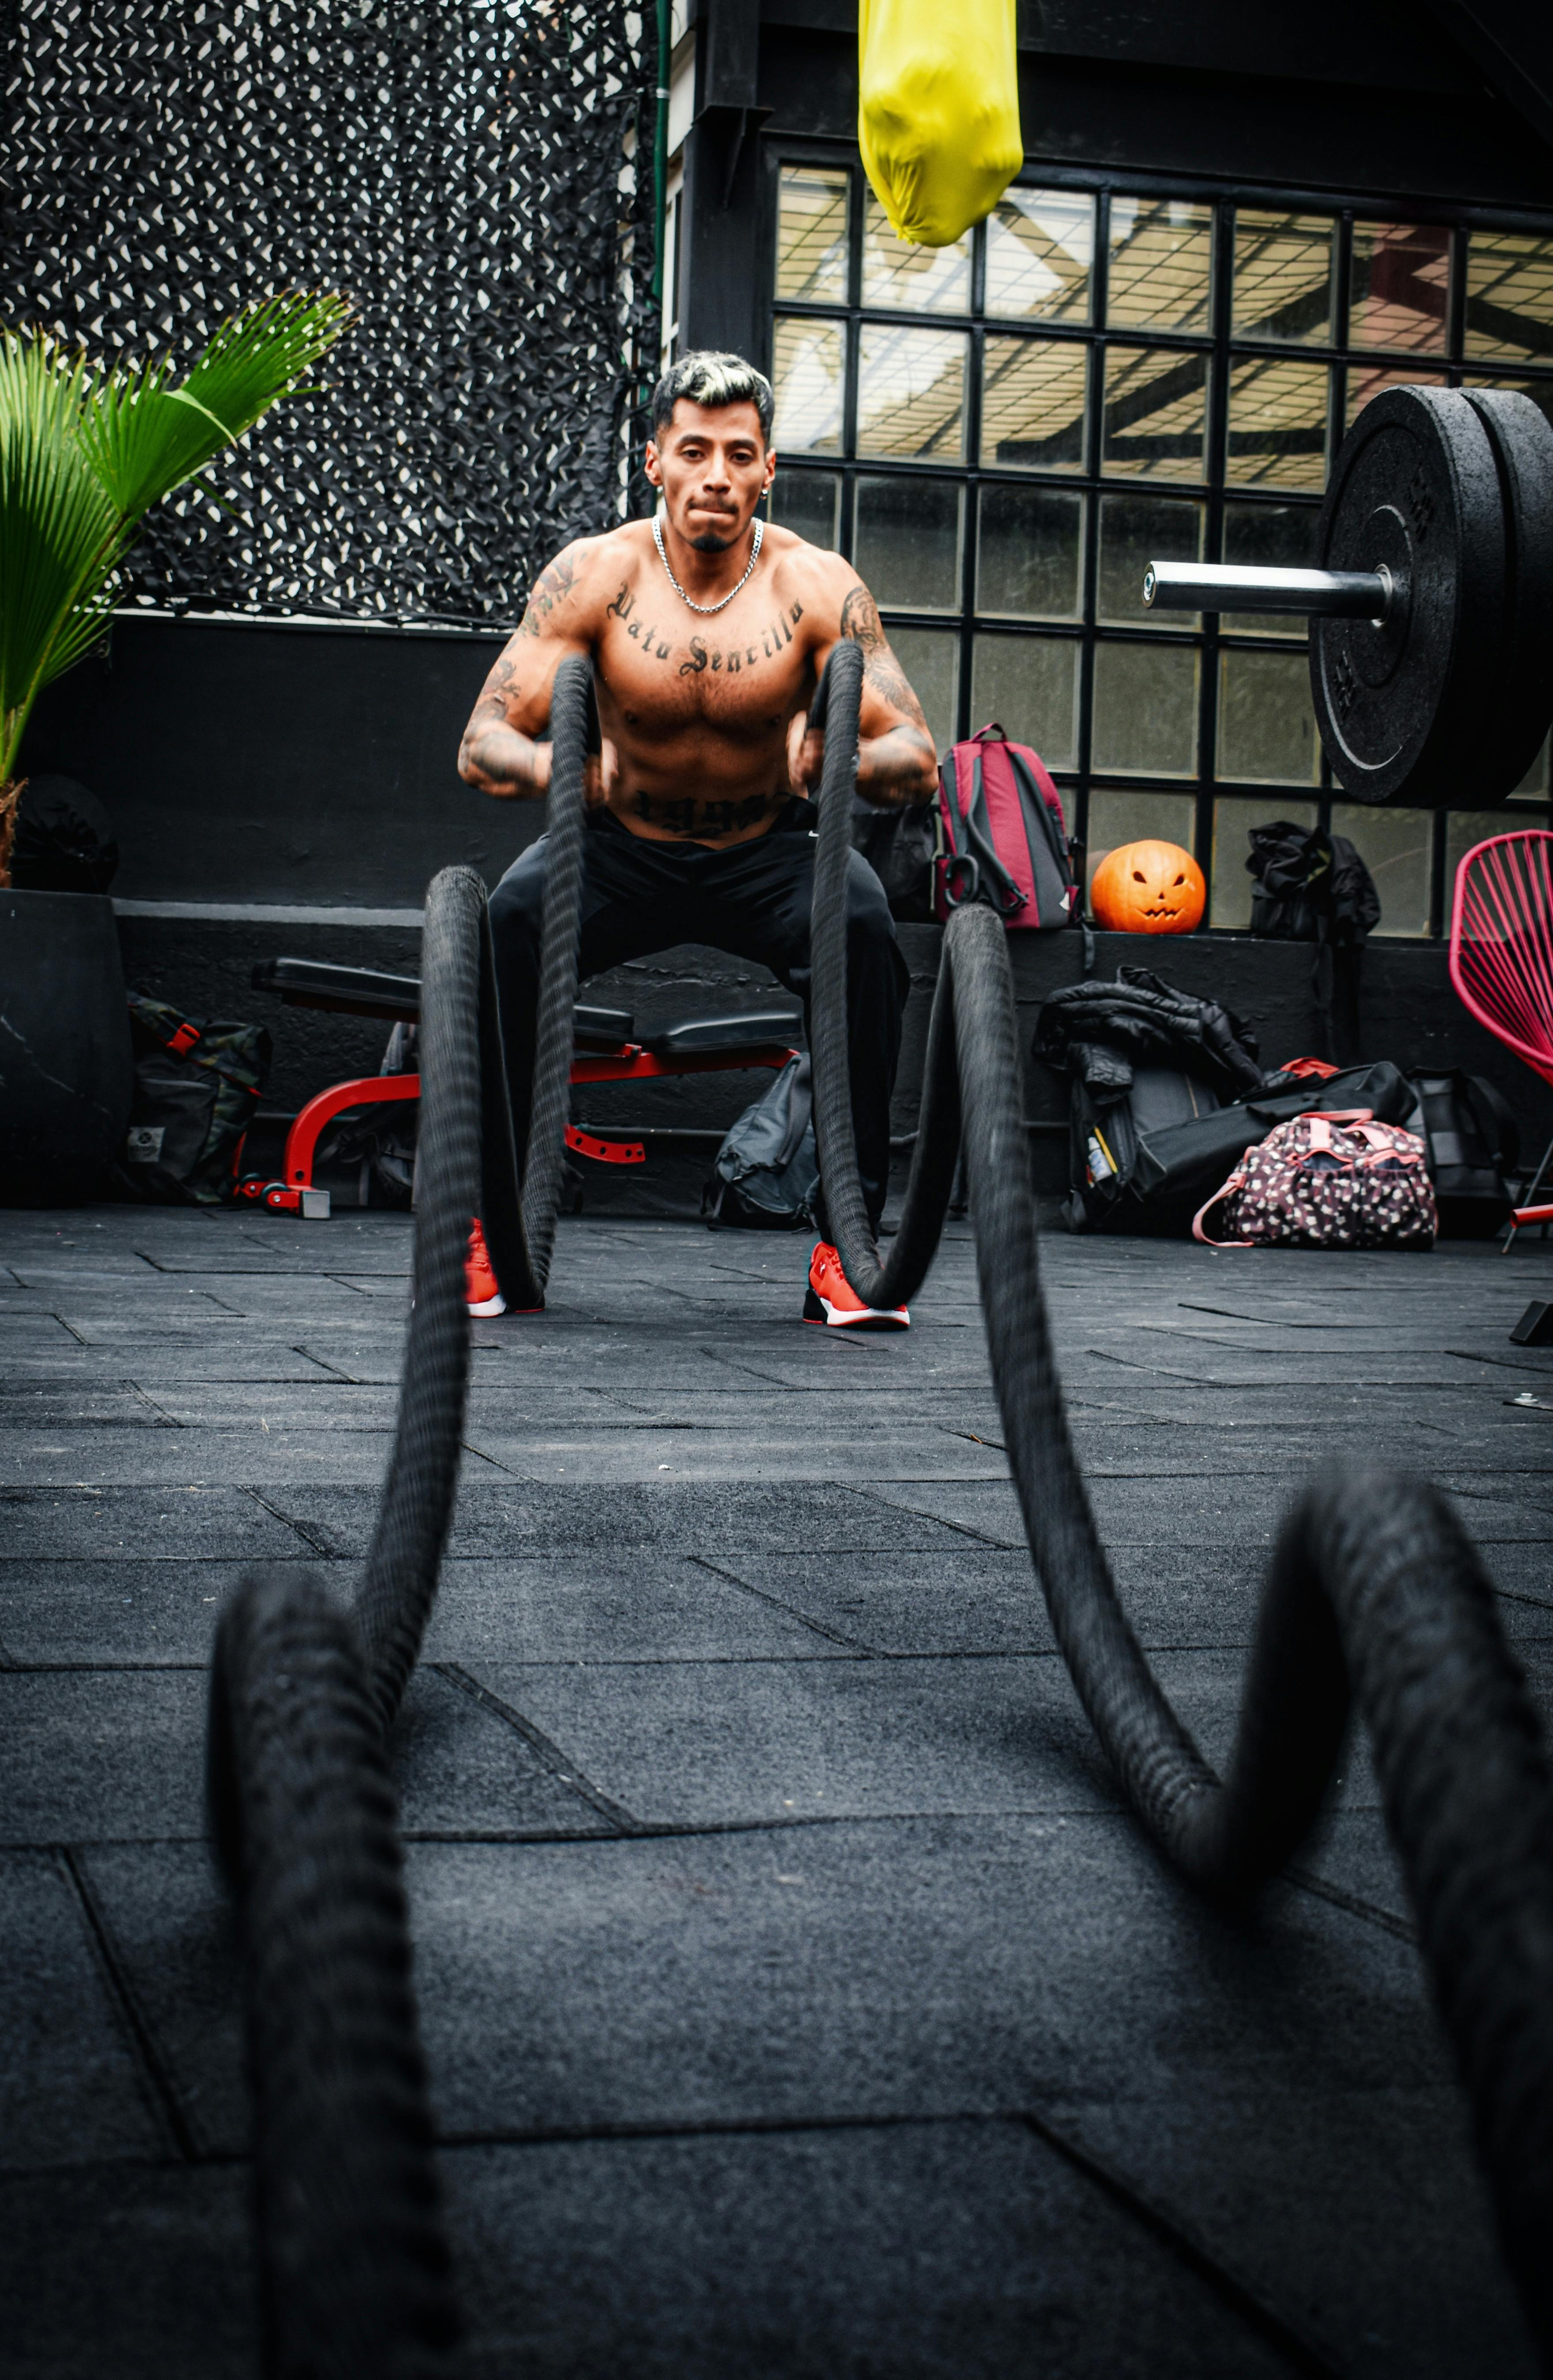 Ejercicios Crossfit (V): Battle ropes